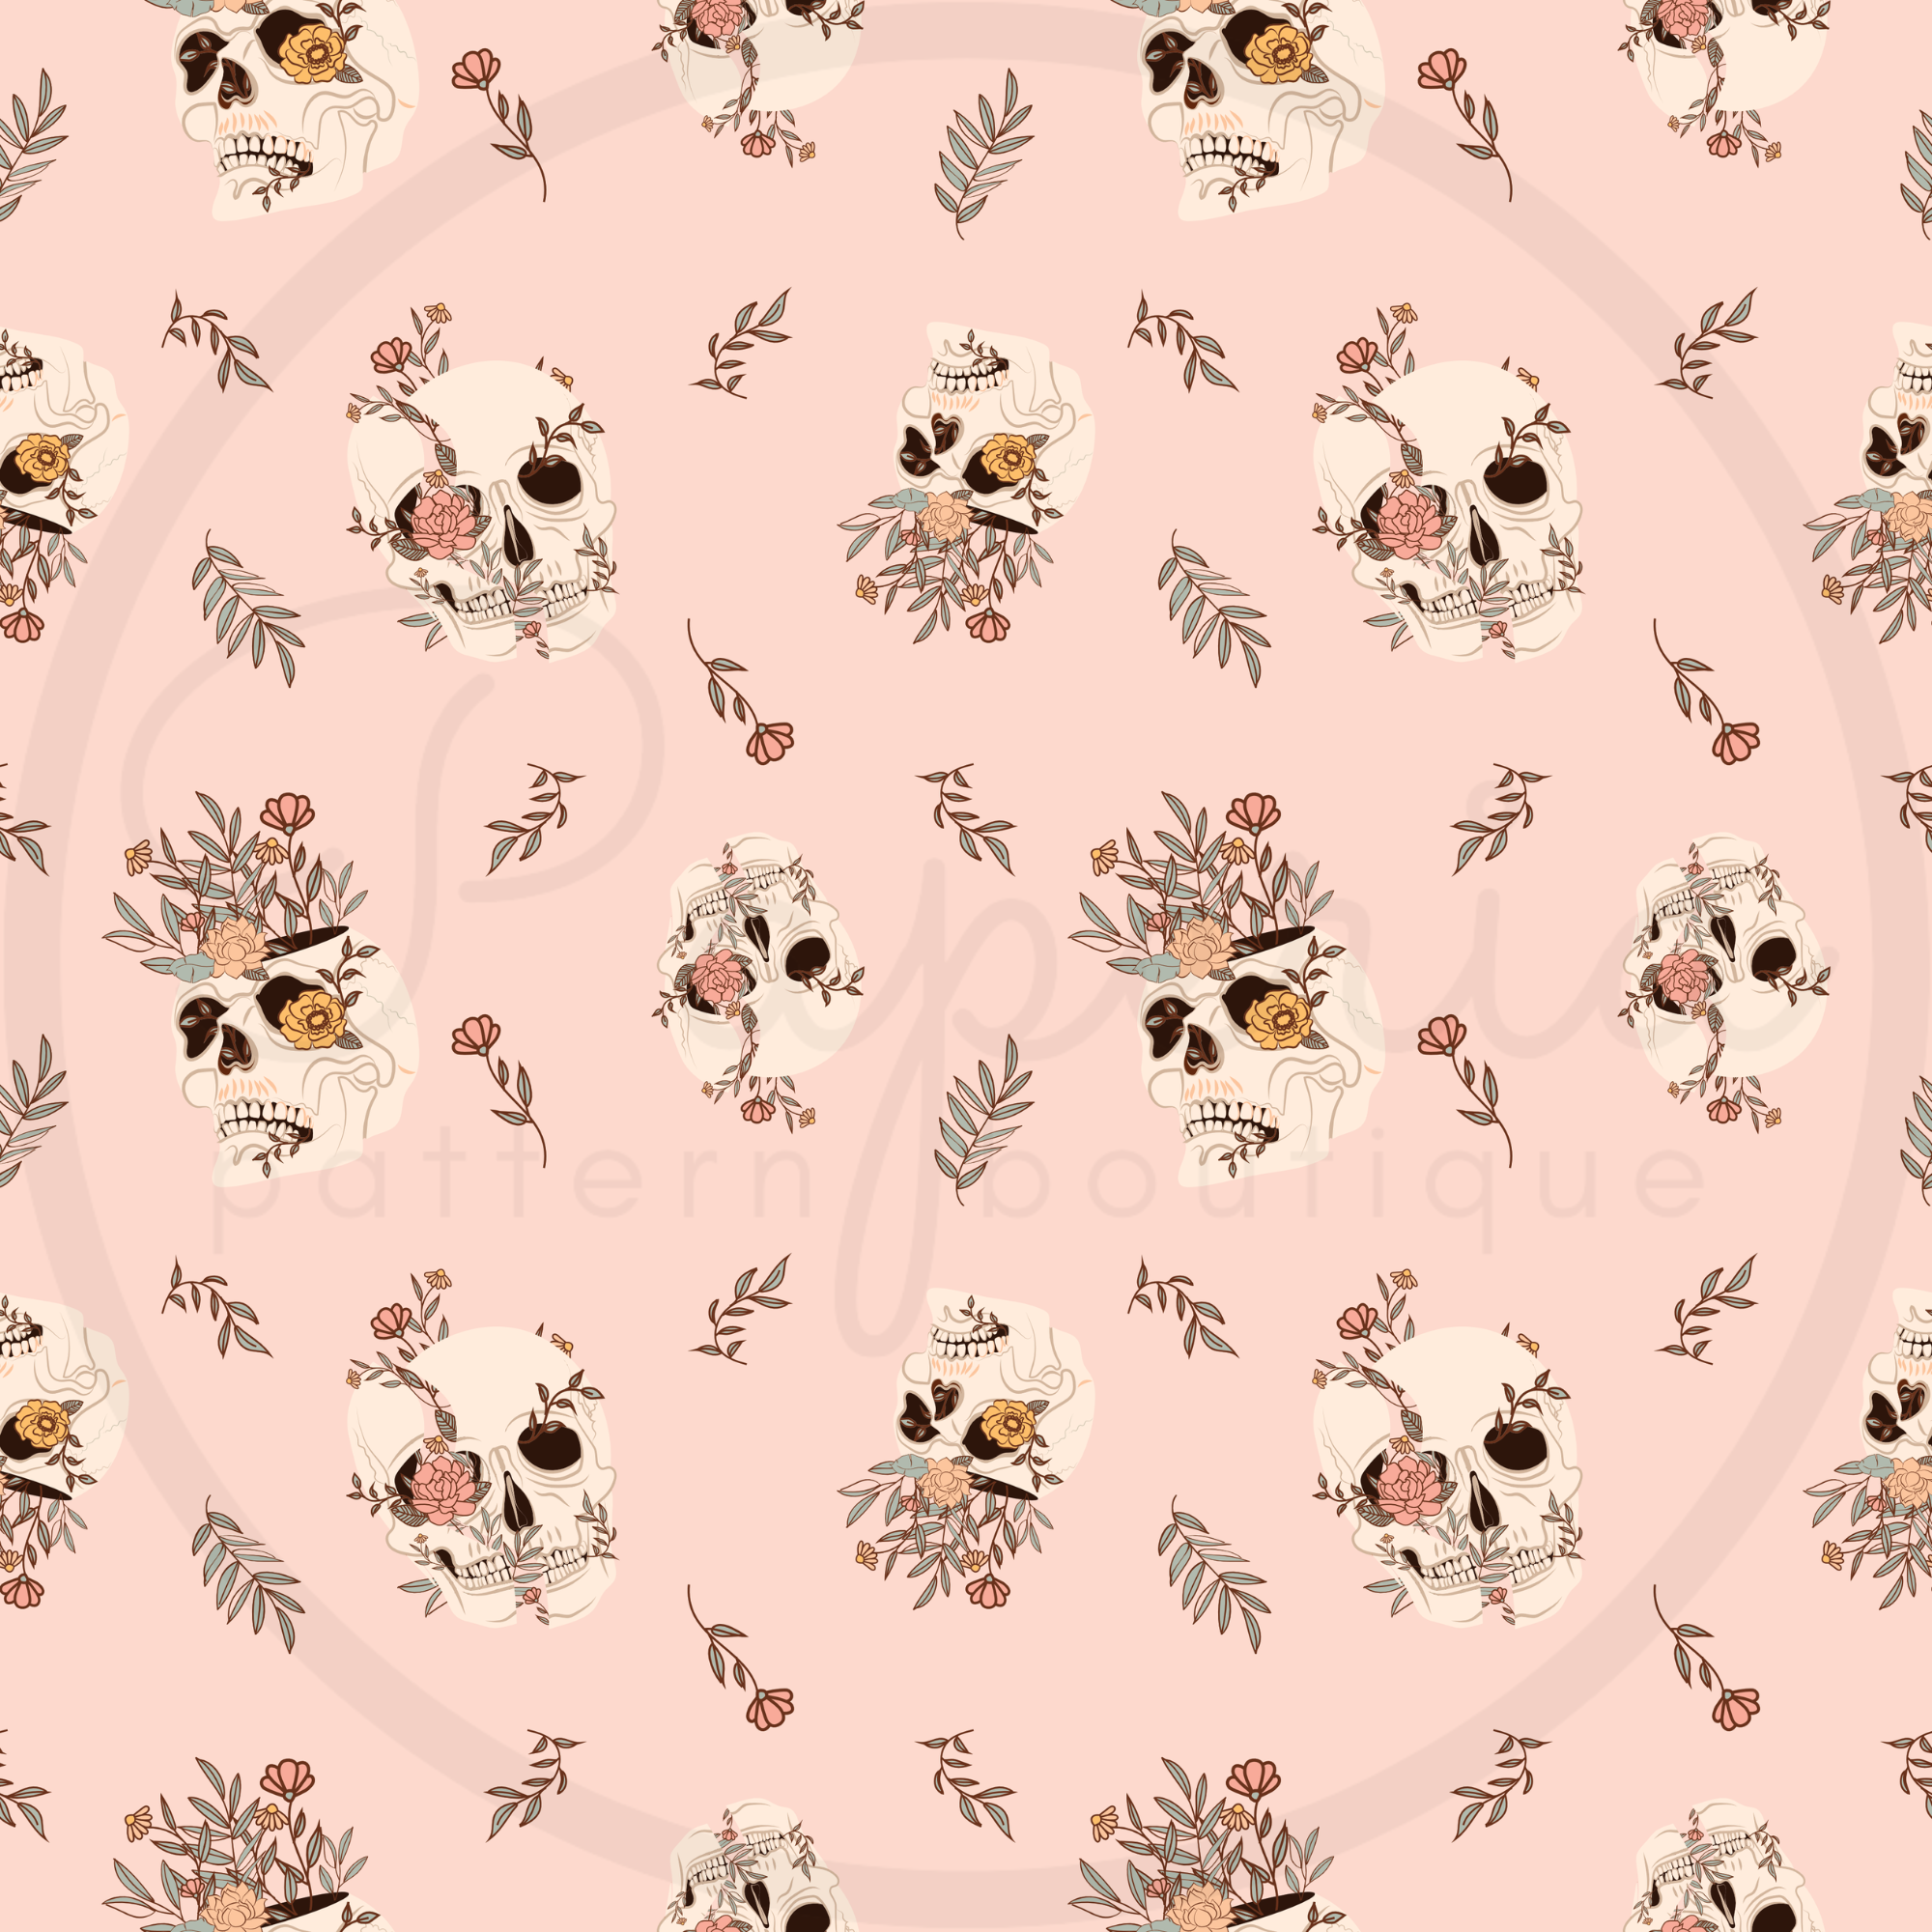 Boho Skull Floral Seamless Repeating Pattern File for Fabric